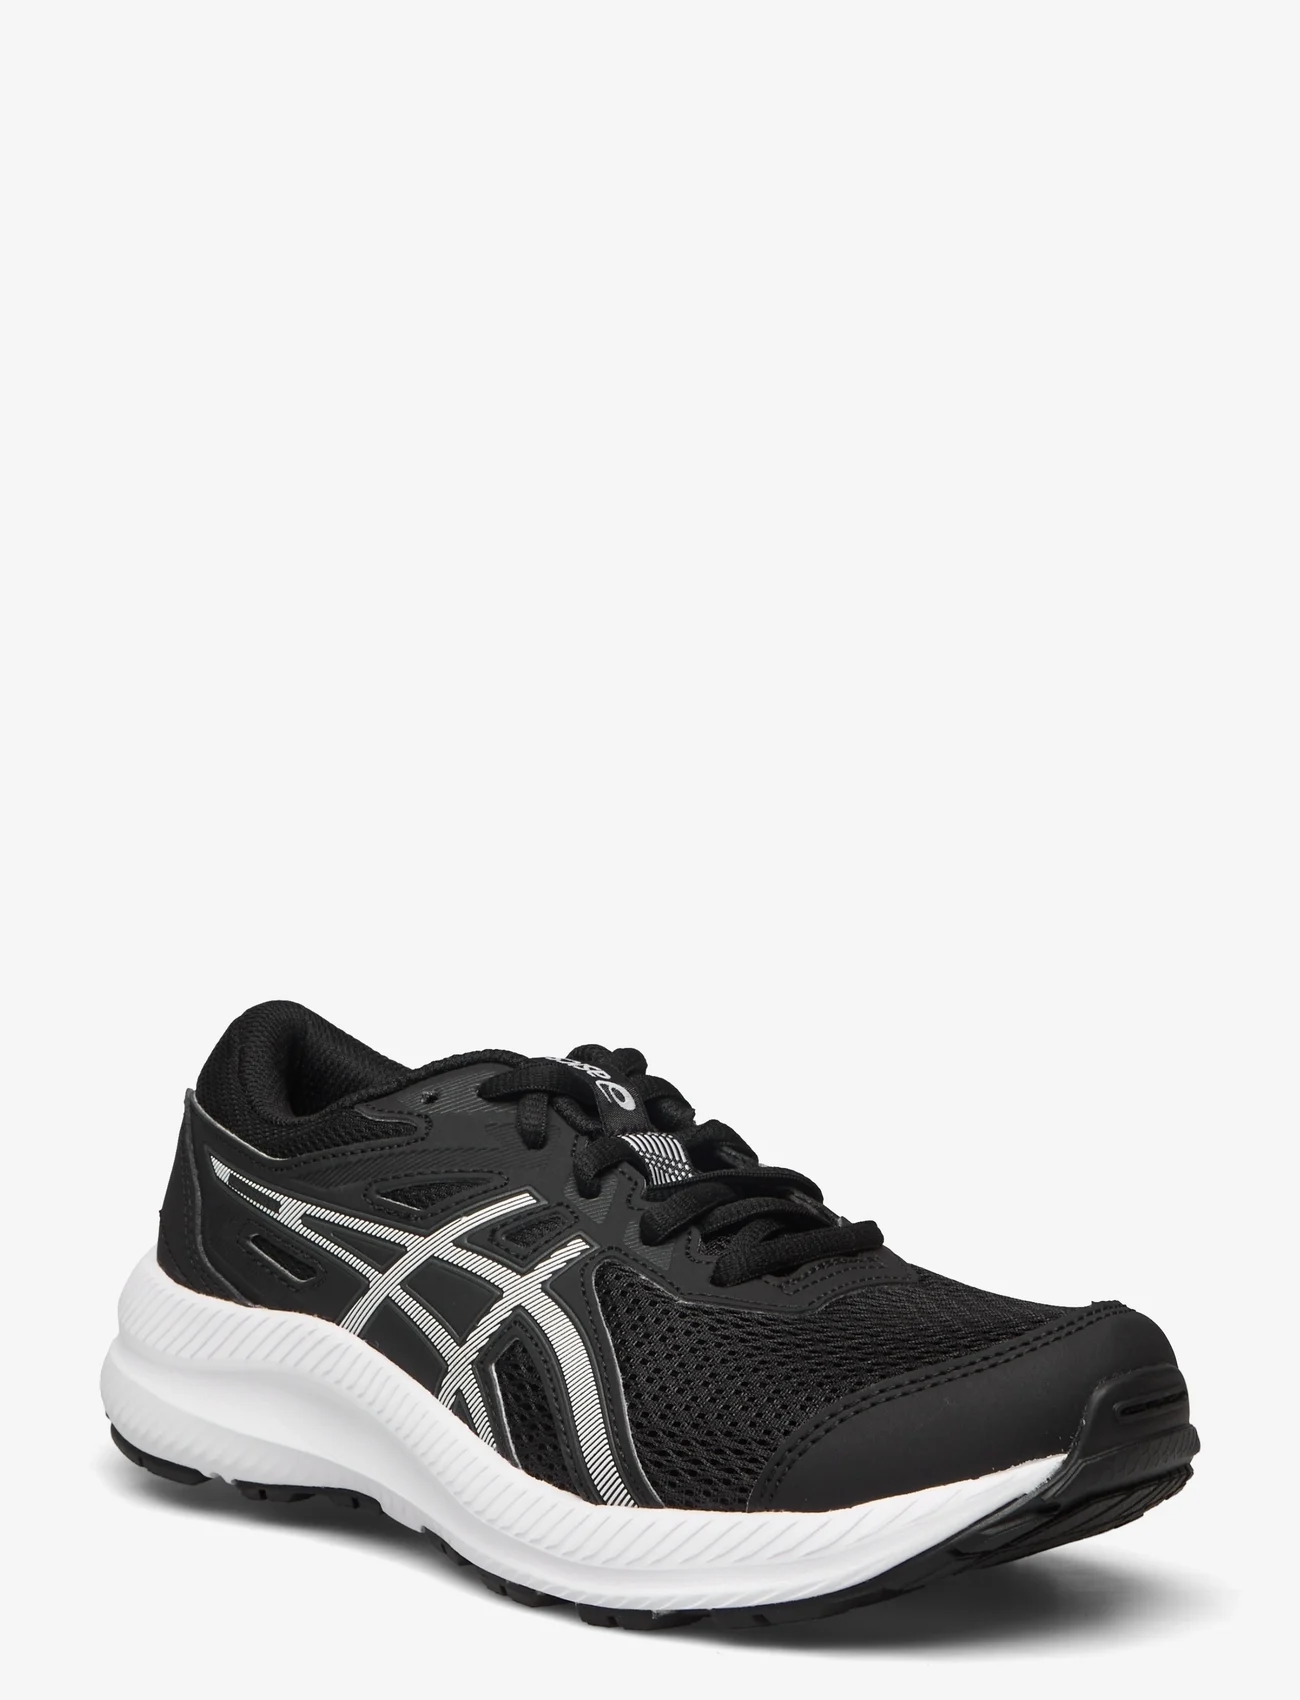 Asics - CONTEND 8 GS - running shoes - black/white - 0